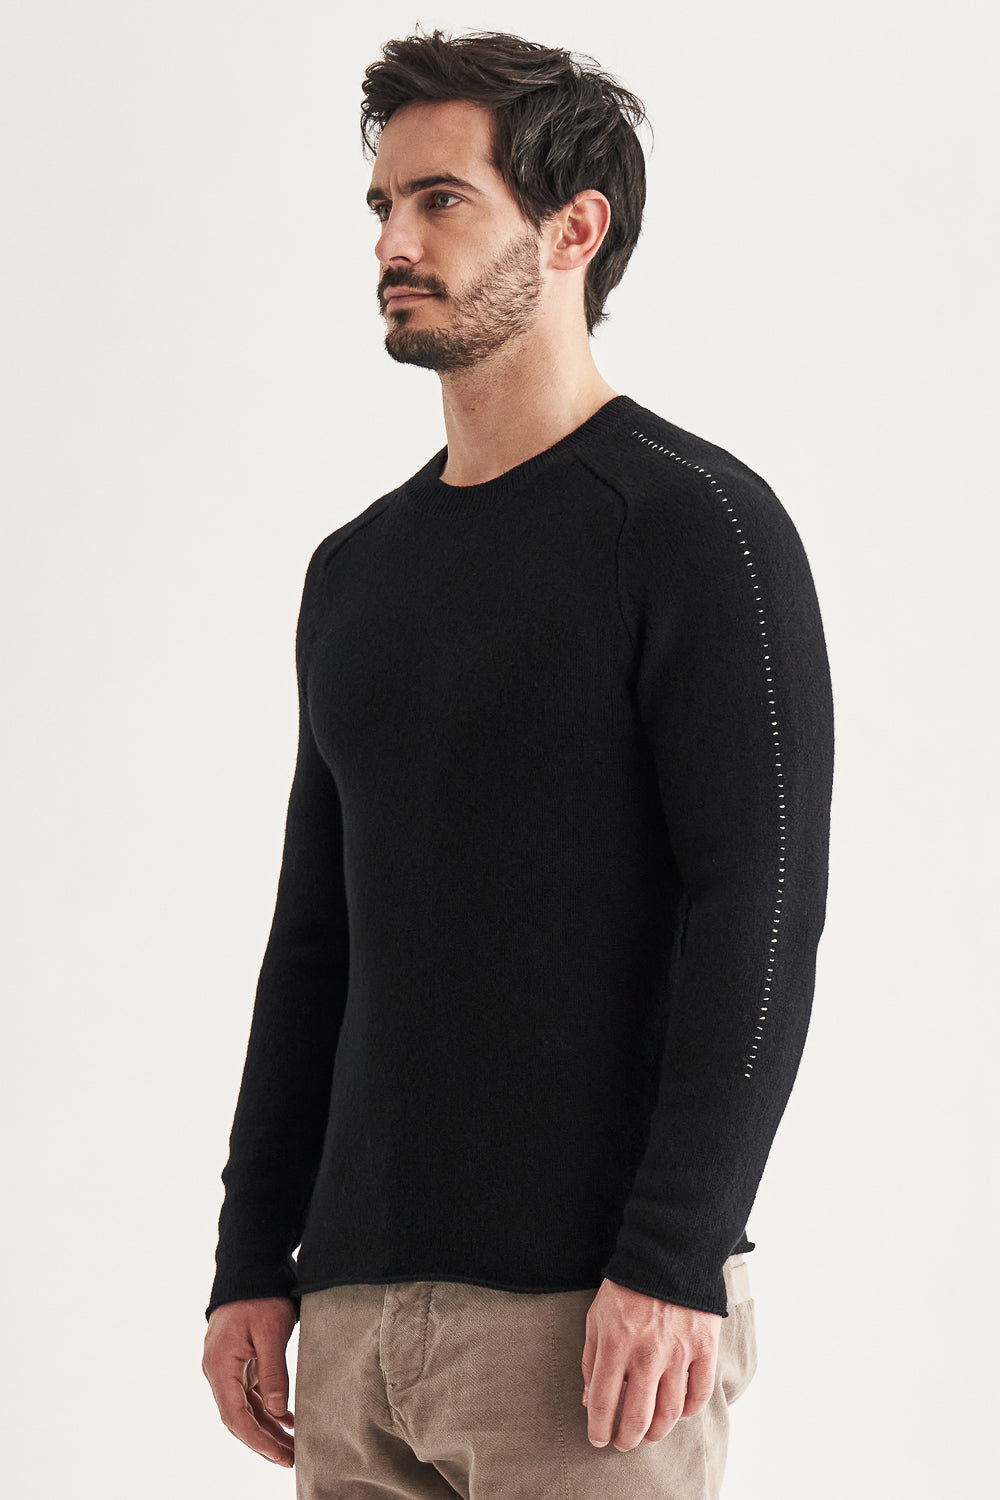 Buy the Transit Cable Virgin Wool Roundneck Knit in Black at Intro. Spend £50 for free UK delivery. Official stockists. We ship worldwide.